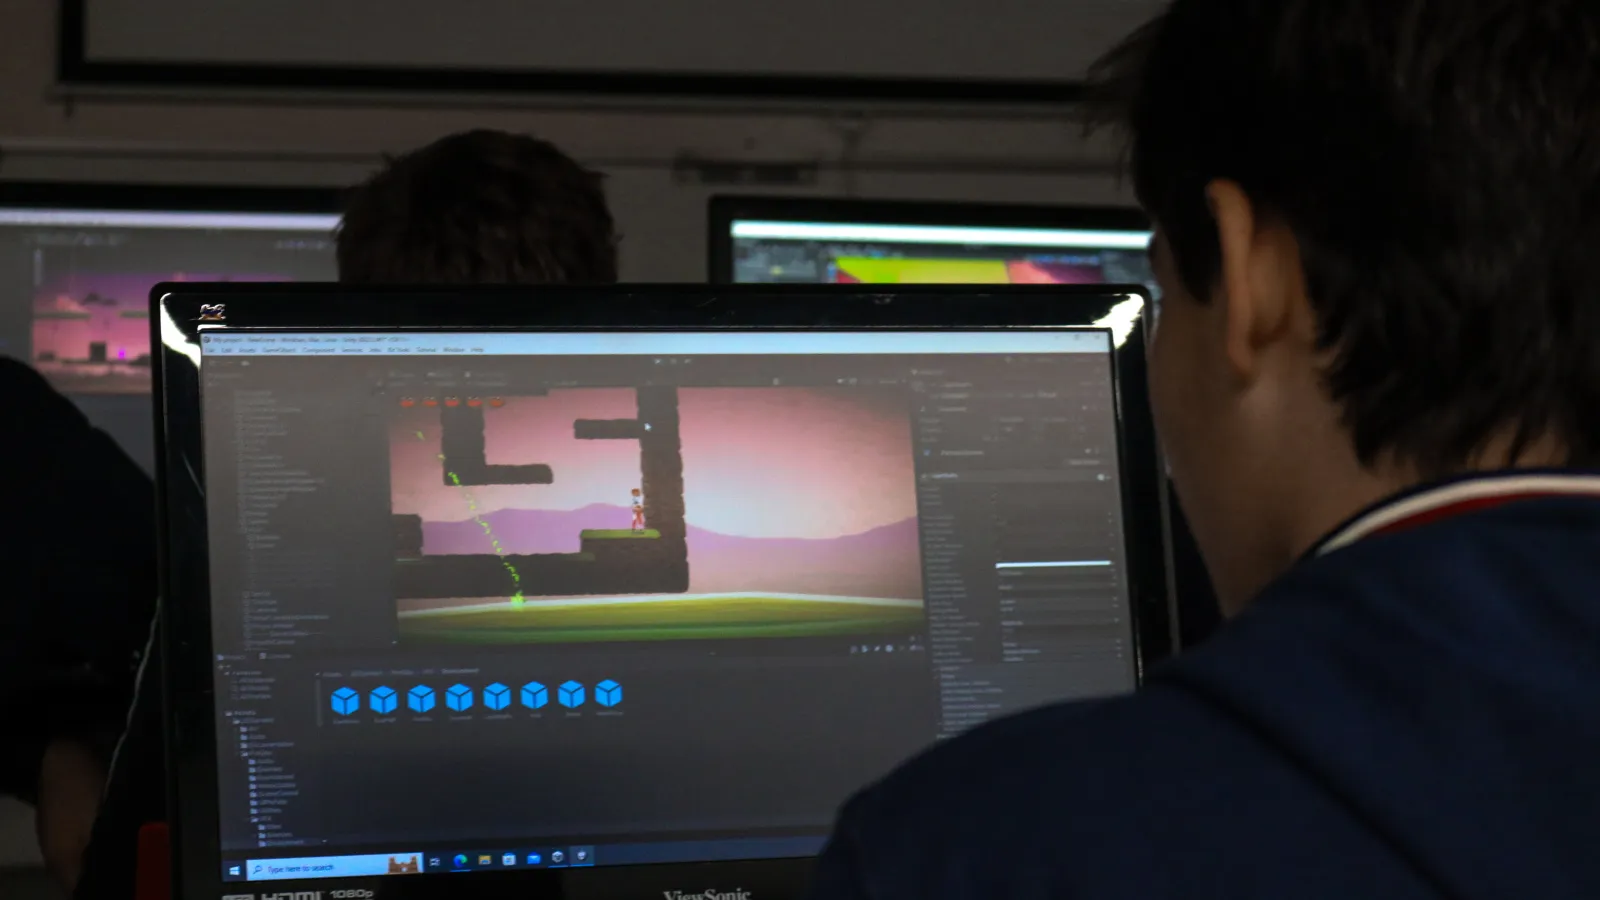 Screen shows a frame from the videogame the sutdent is developing. It shows a character and platforms